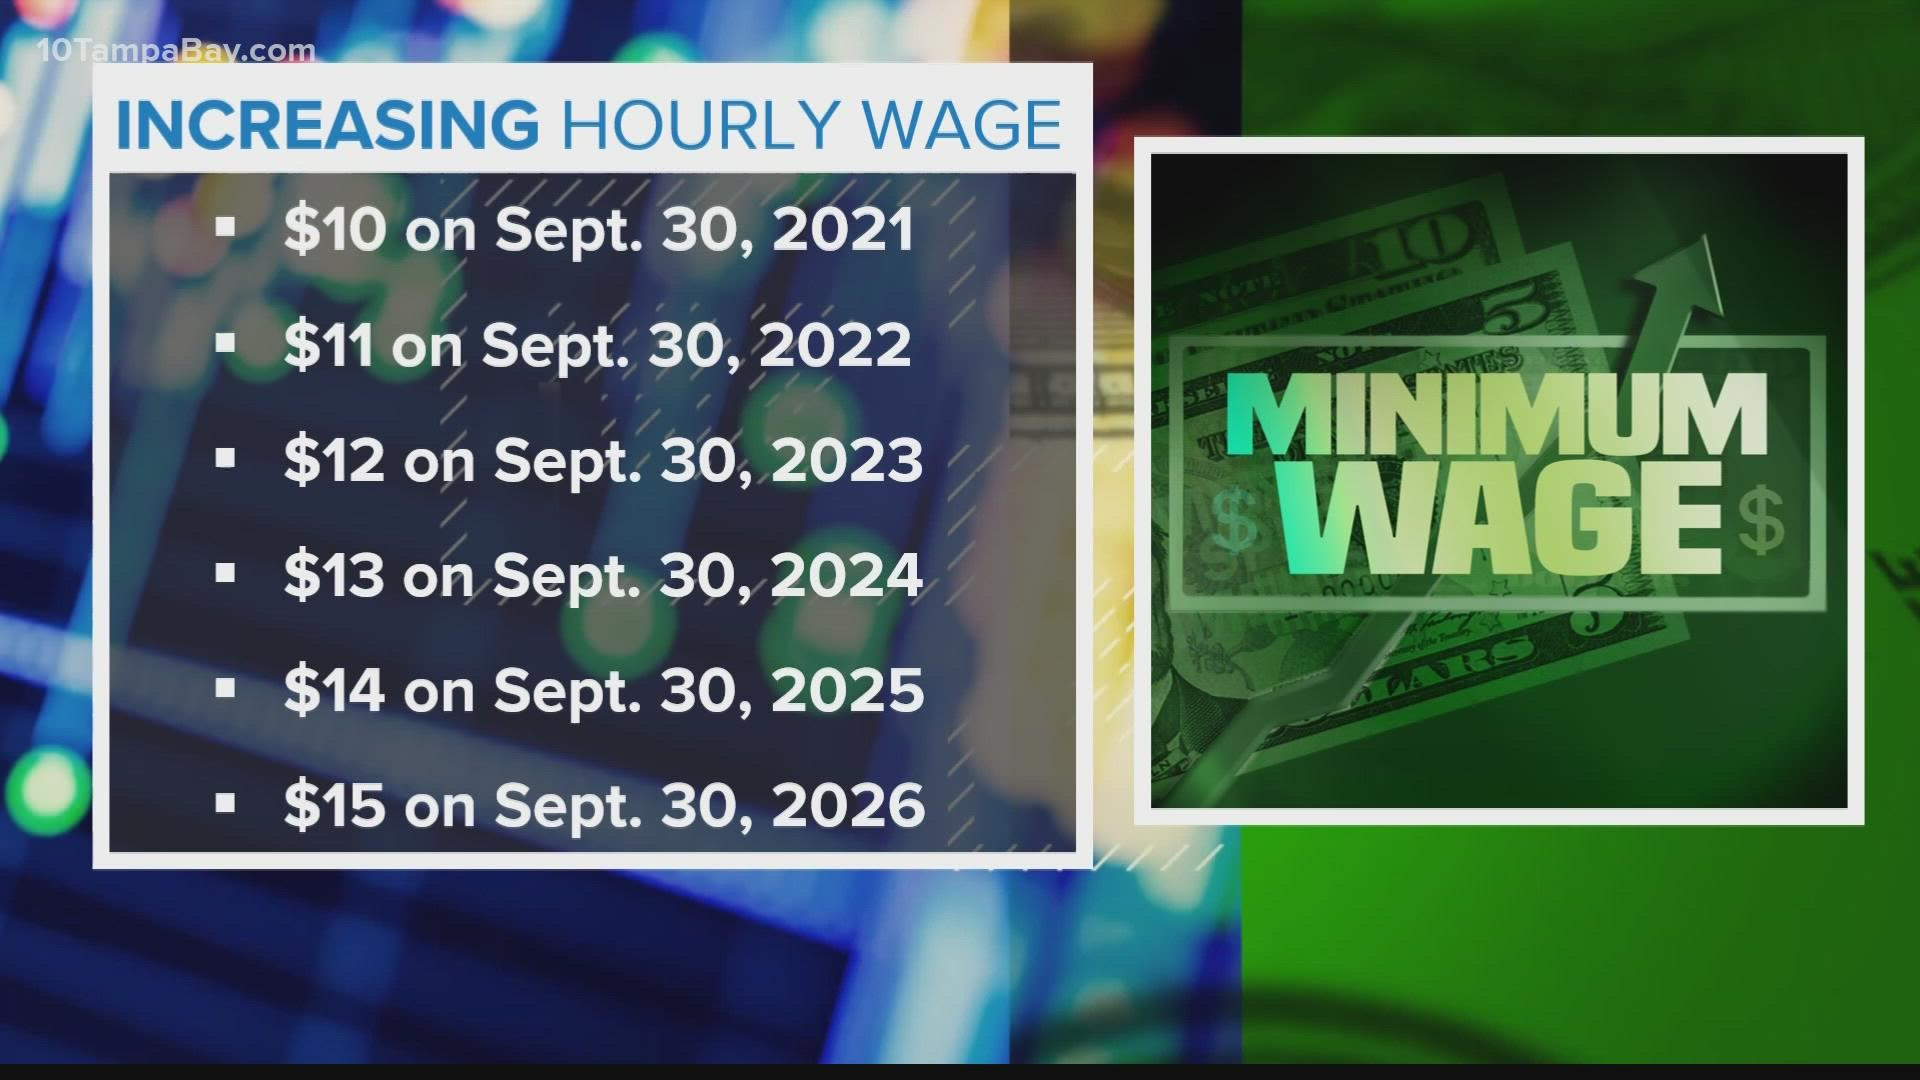 Floridians can expect to see a minimum wage hike by Friday.